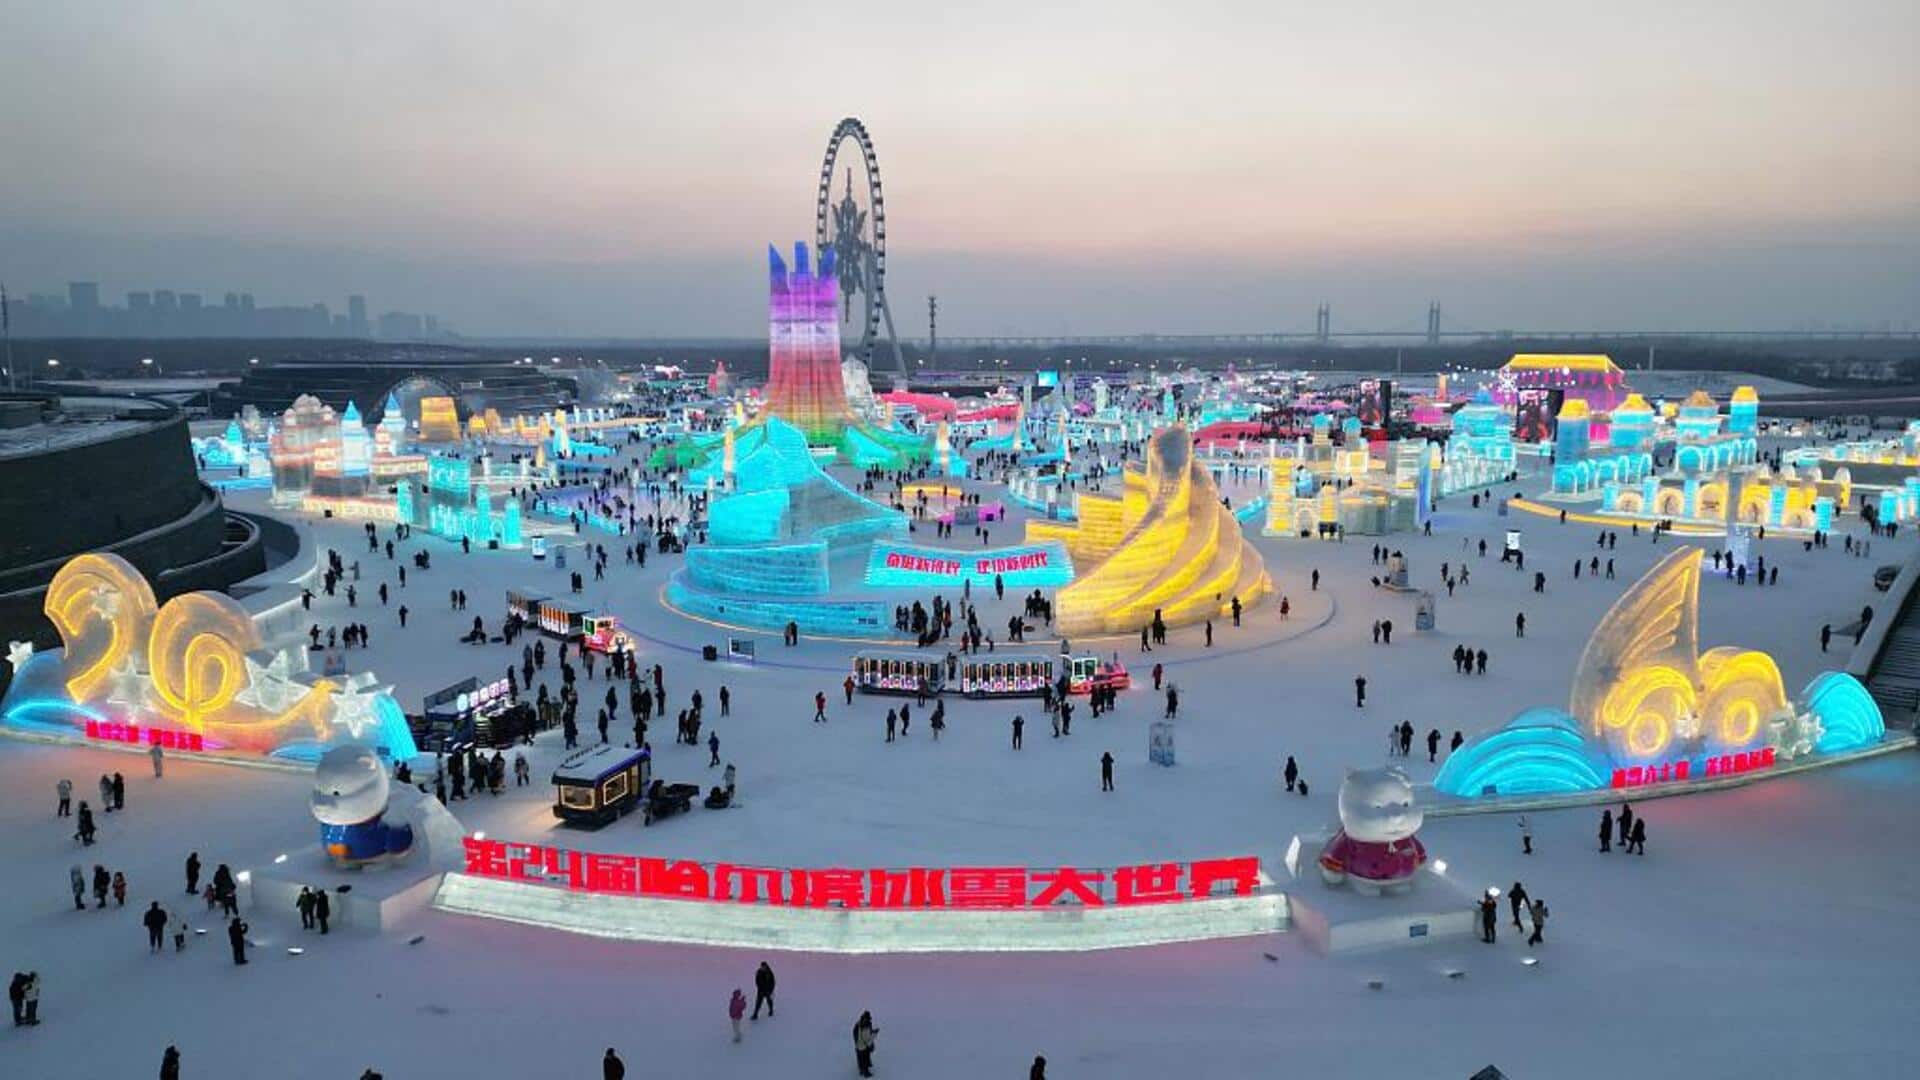 Attend the Harbin Ice and Snow Festival in China